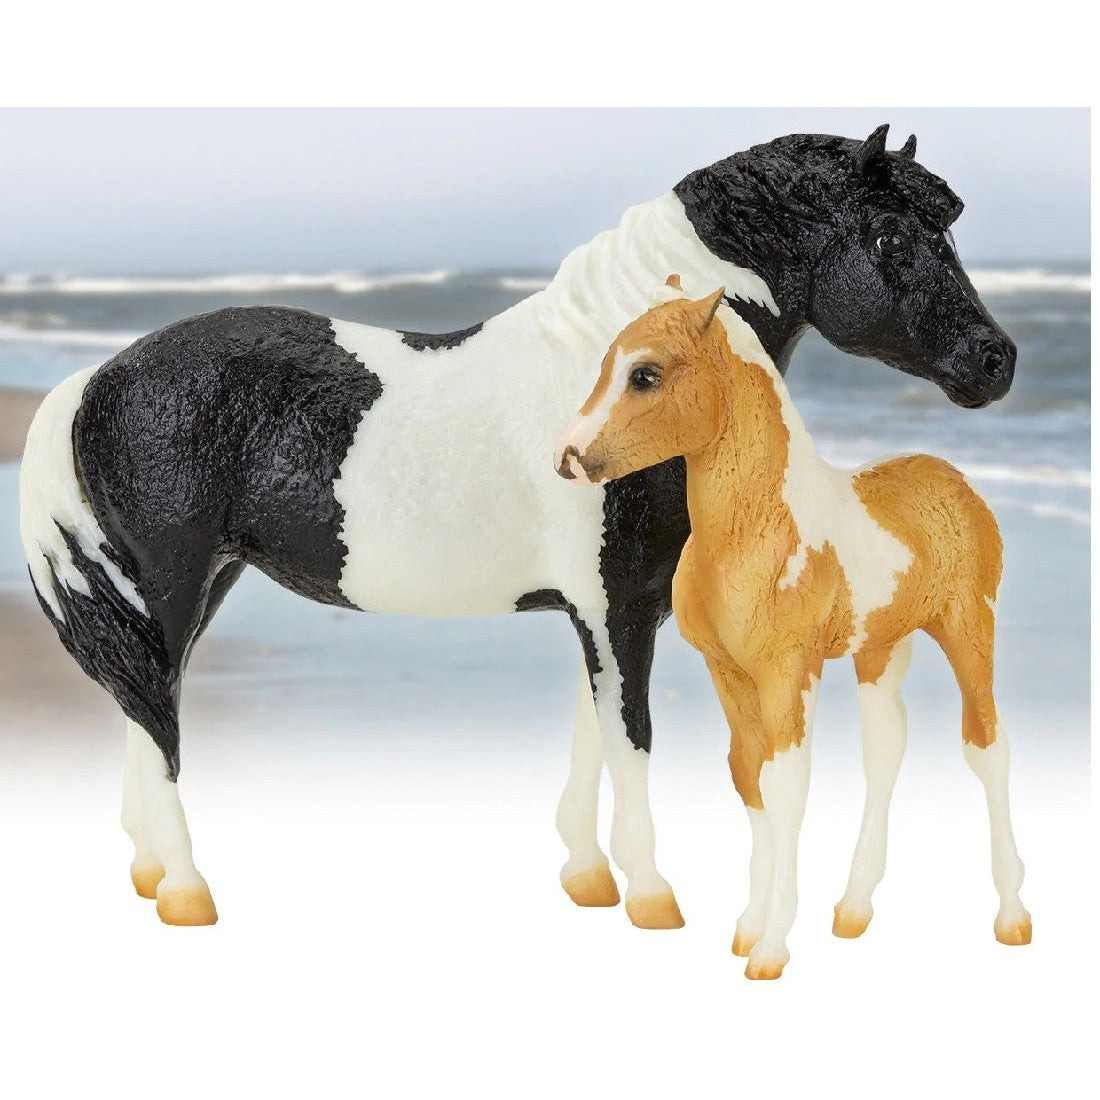 Breyer Horse Toys models of a black and white mare and foal.